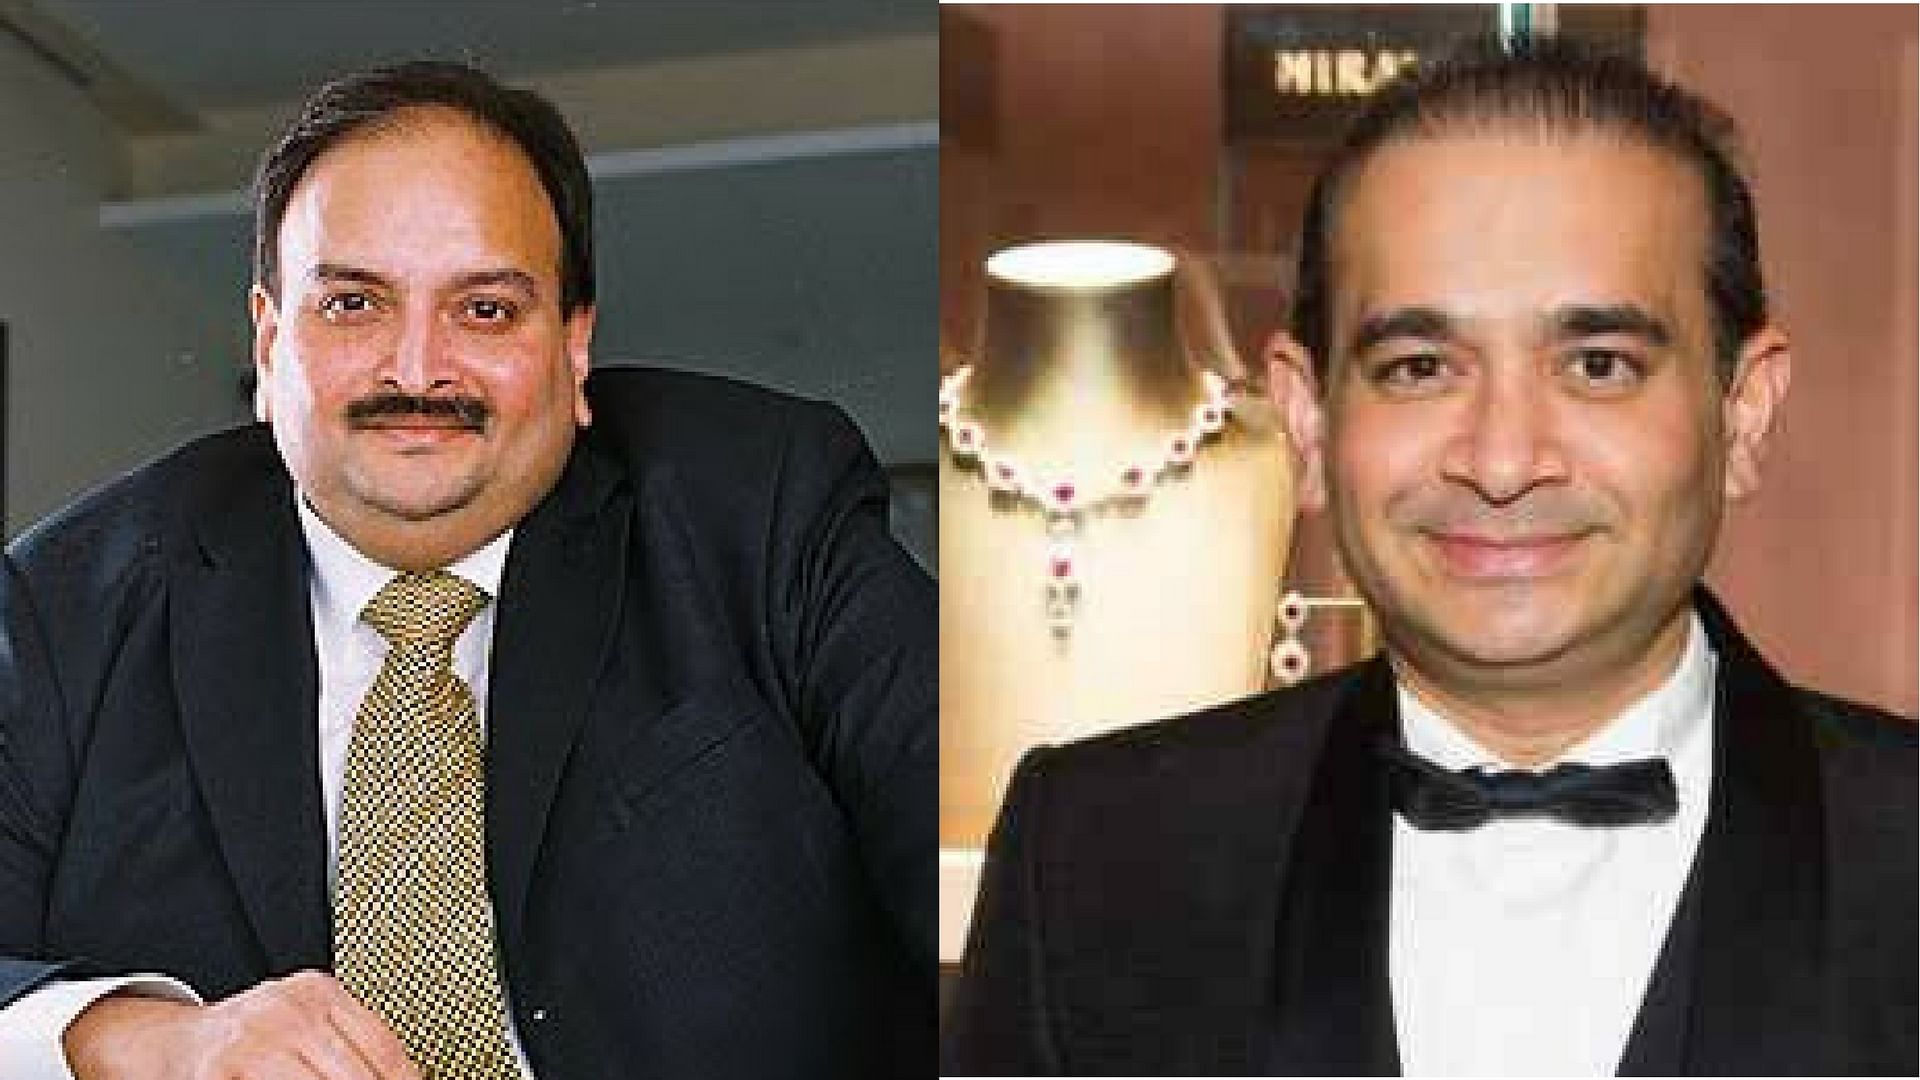 Some directors of Mehul Choksi’s company, who have been implicated in the PNB fraud, live in Mumbai’s chawls.